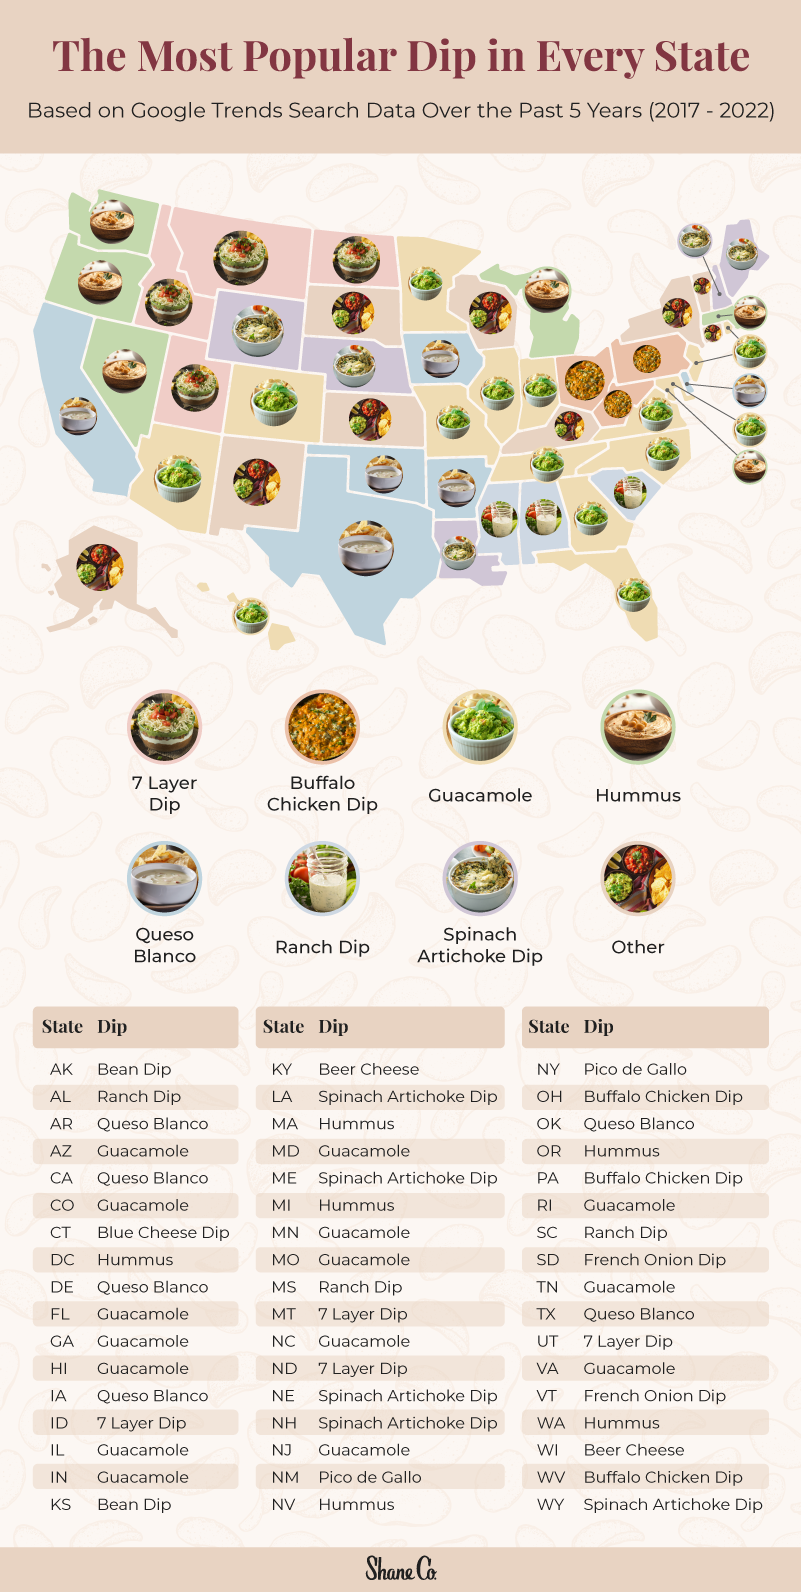 A map displaying the most popular chip dip in every U.S. state over the past five years